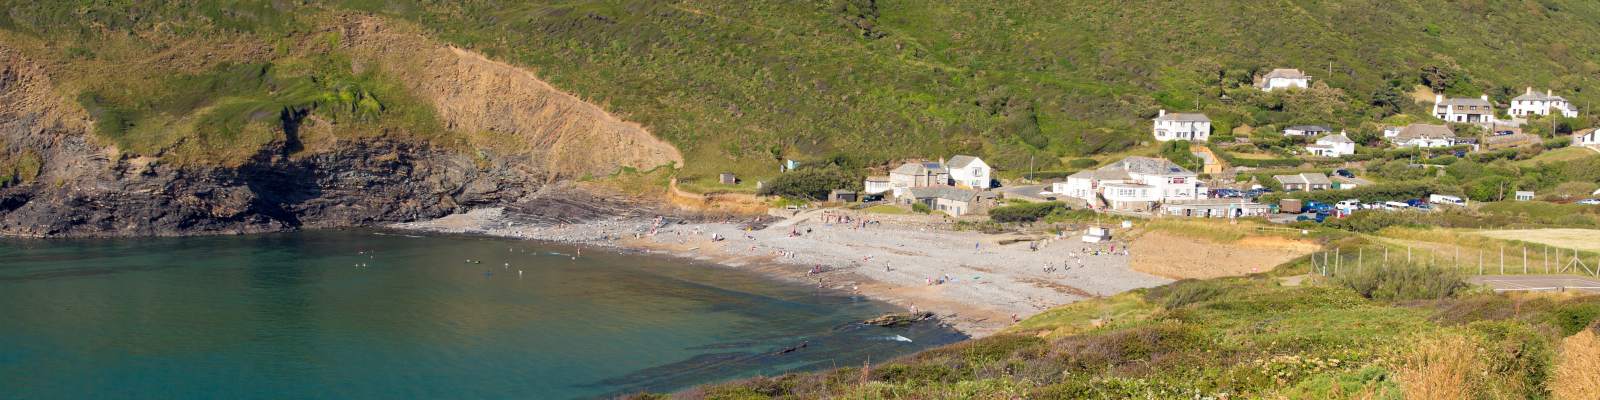 Holiday Cottages In Crackington Haven To Rent Self Catering